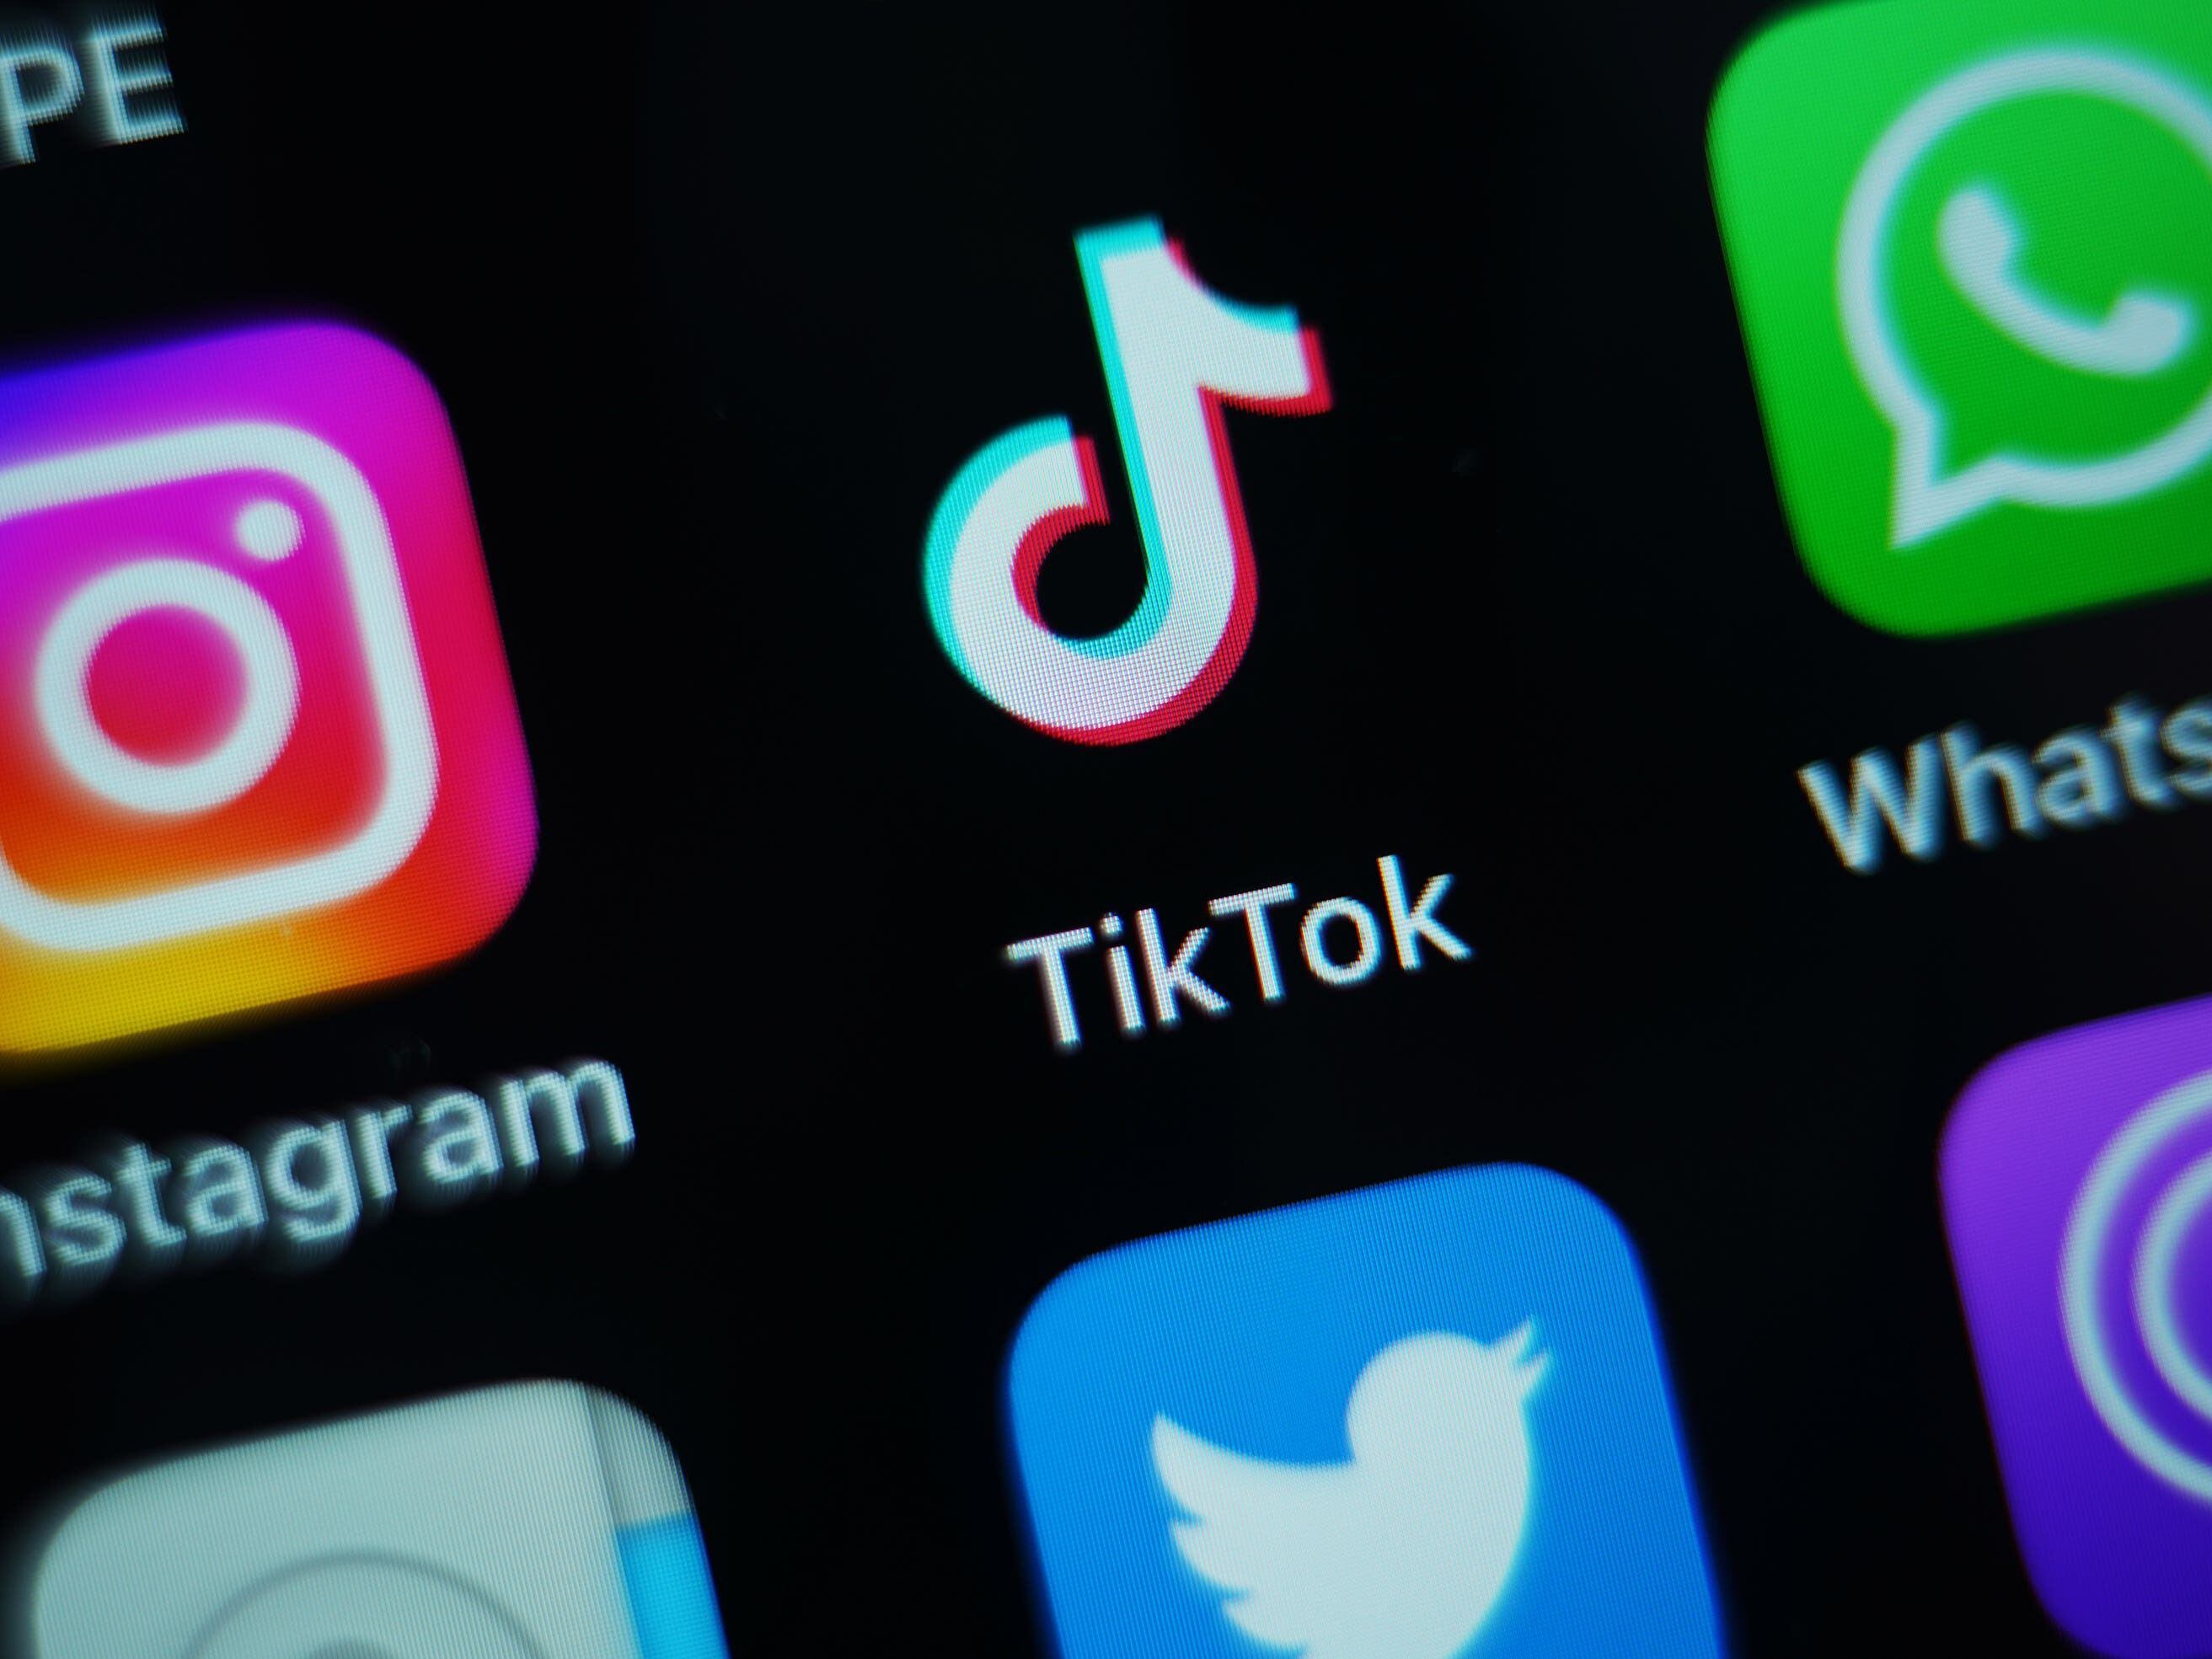 TikTok COO to step down from company after nearly five years in role